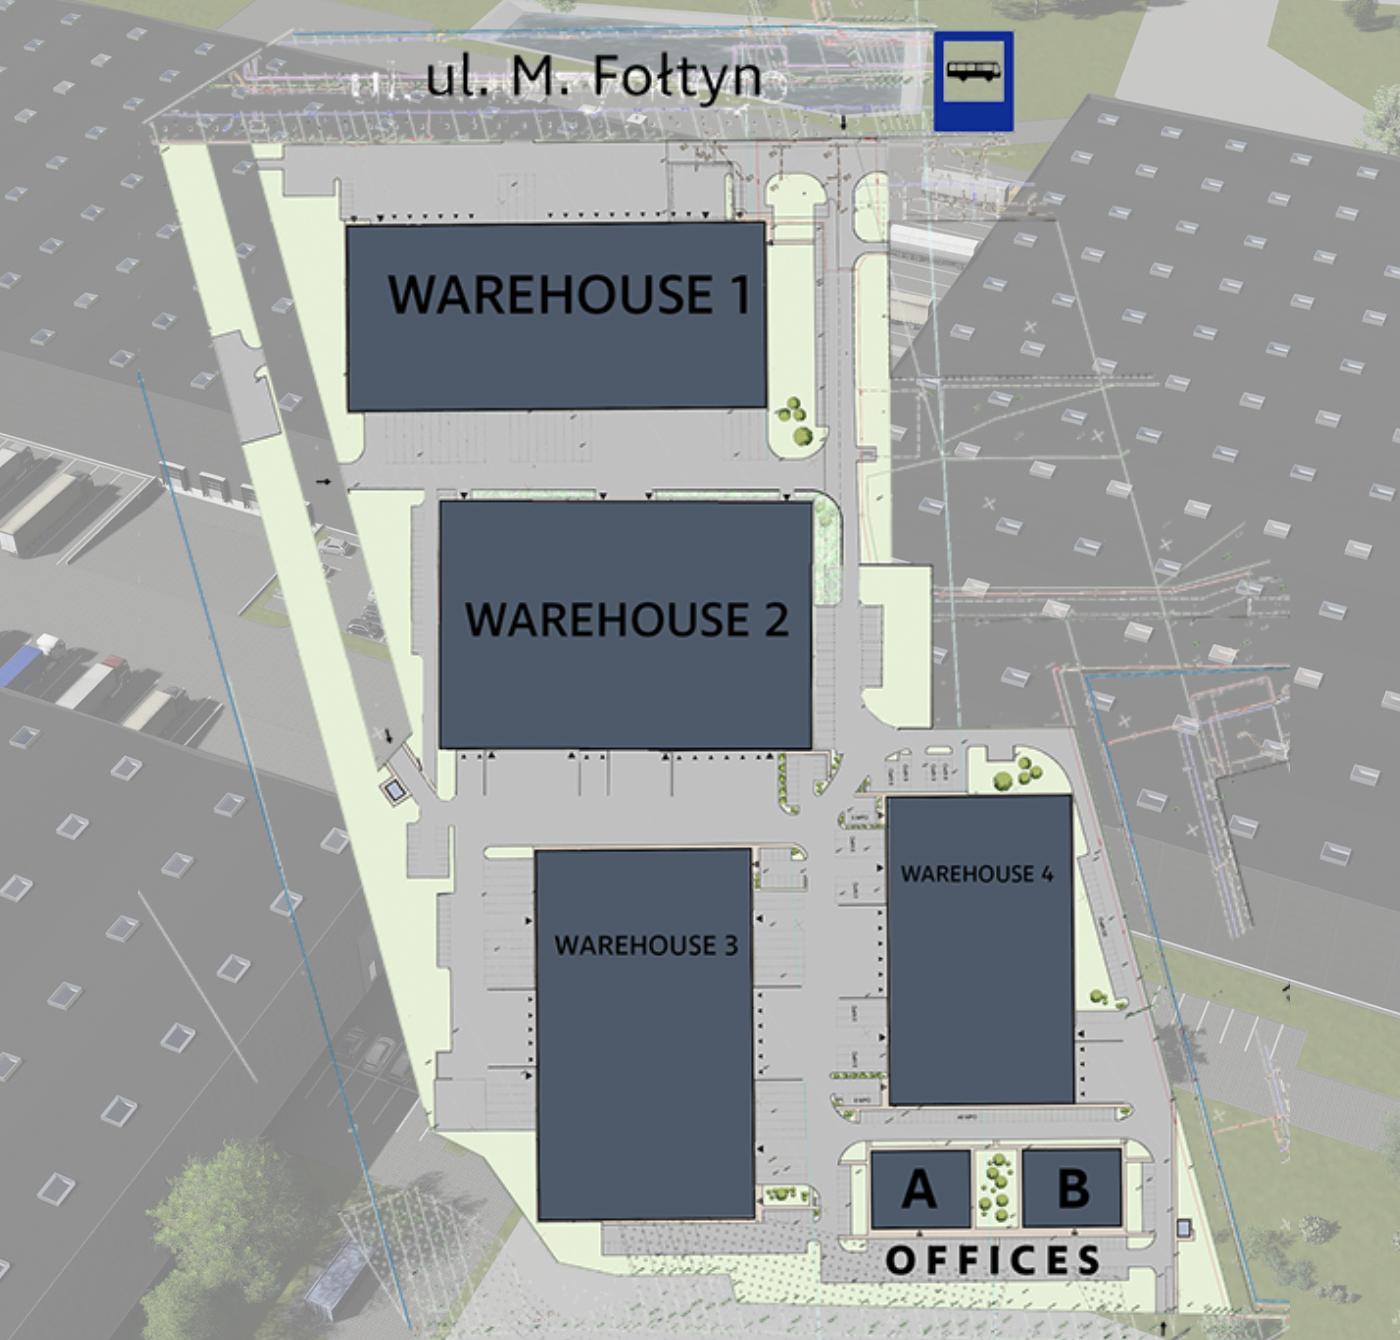 Warehouses for rent in Warehouses TG Park. Siteplan.